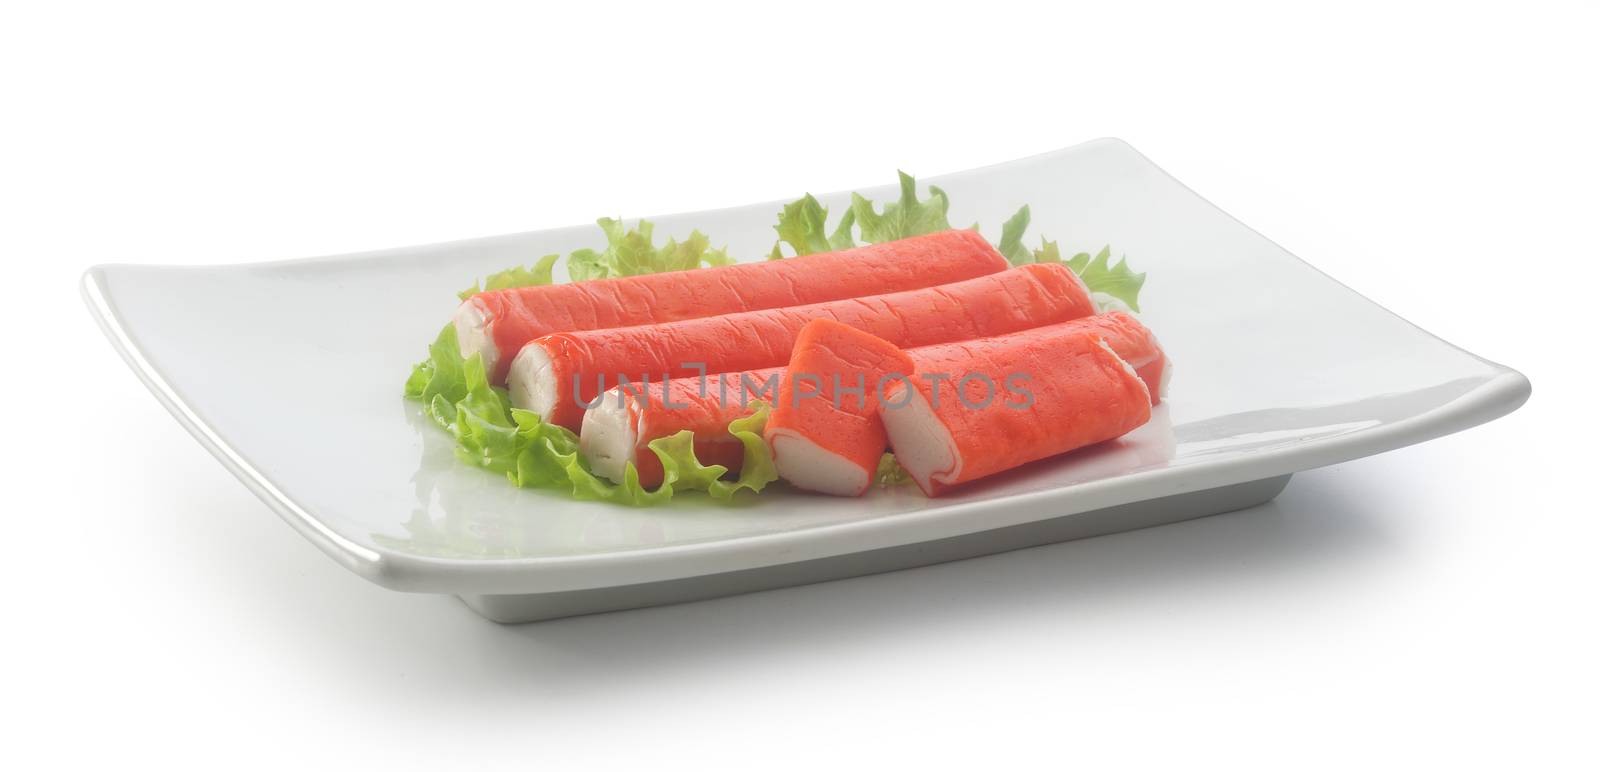 Some red crab stick with green lettuce on the white plate